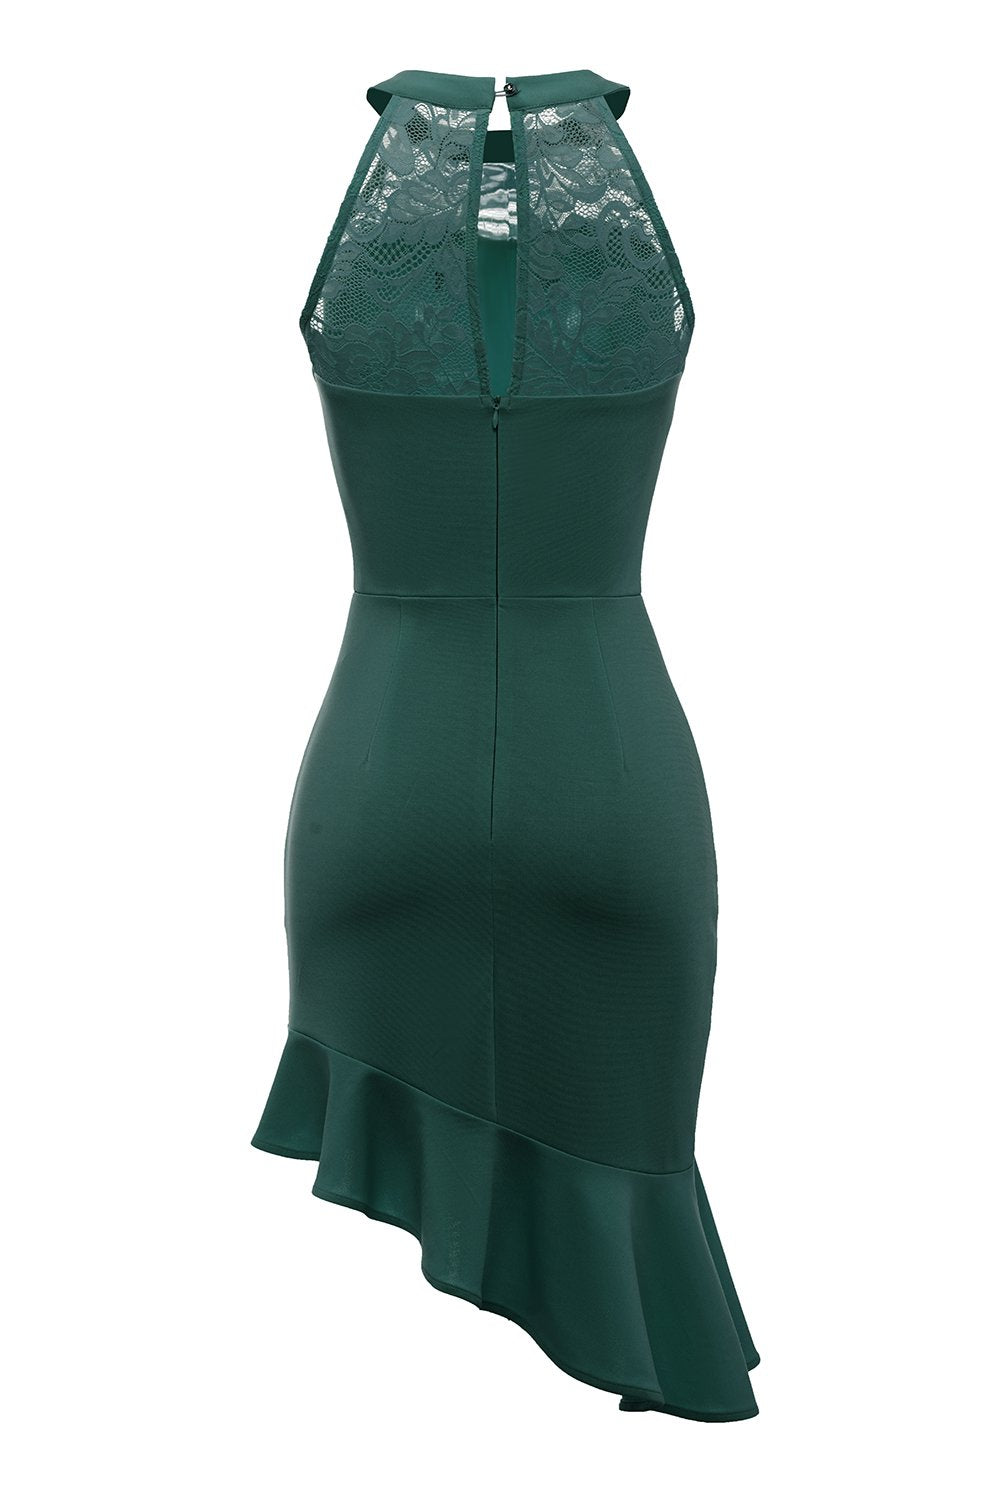 Dark Green Cocktail Dress with Lace